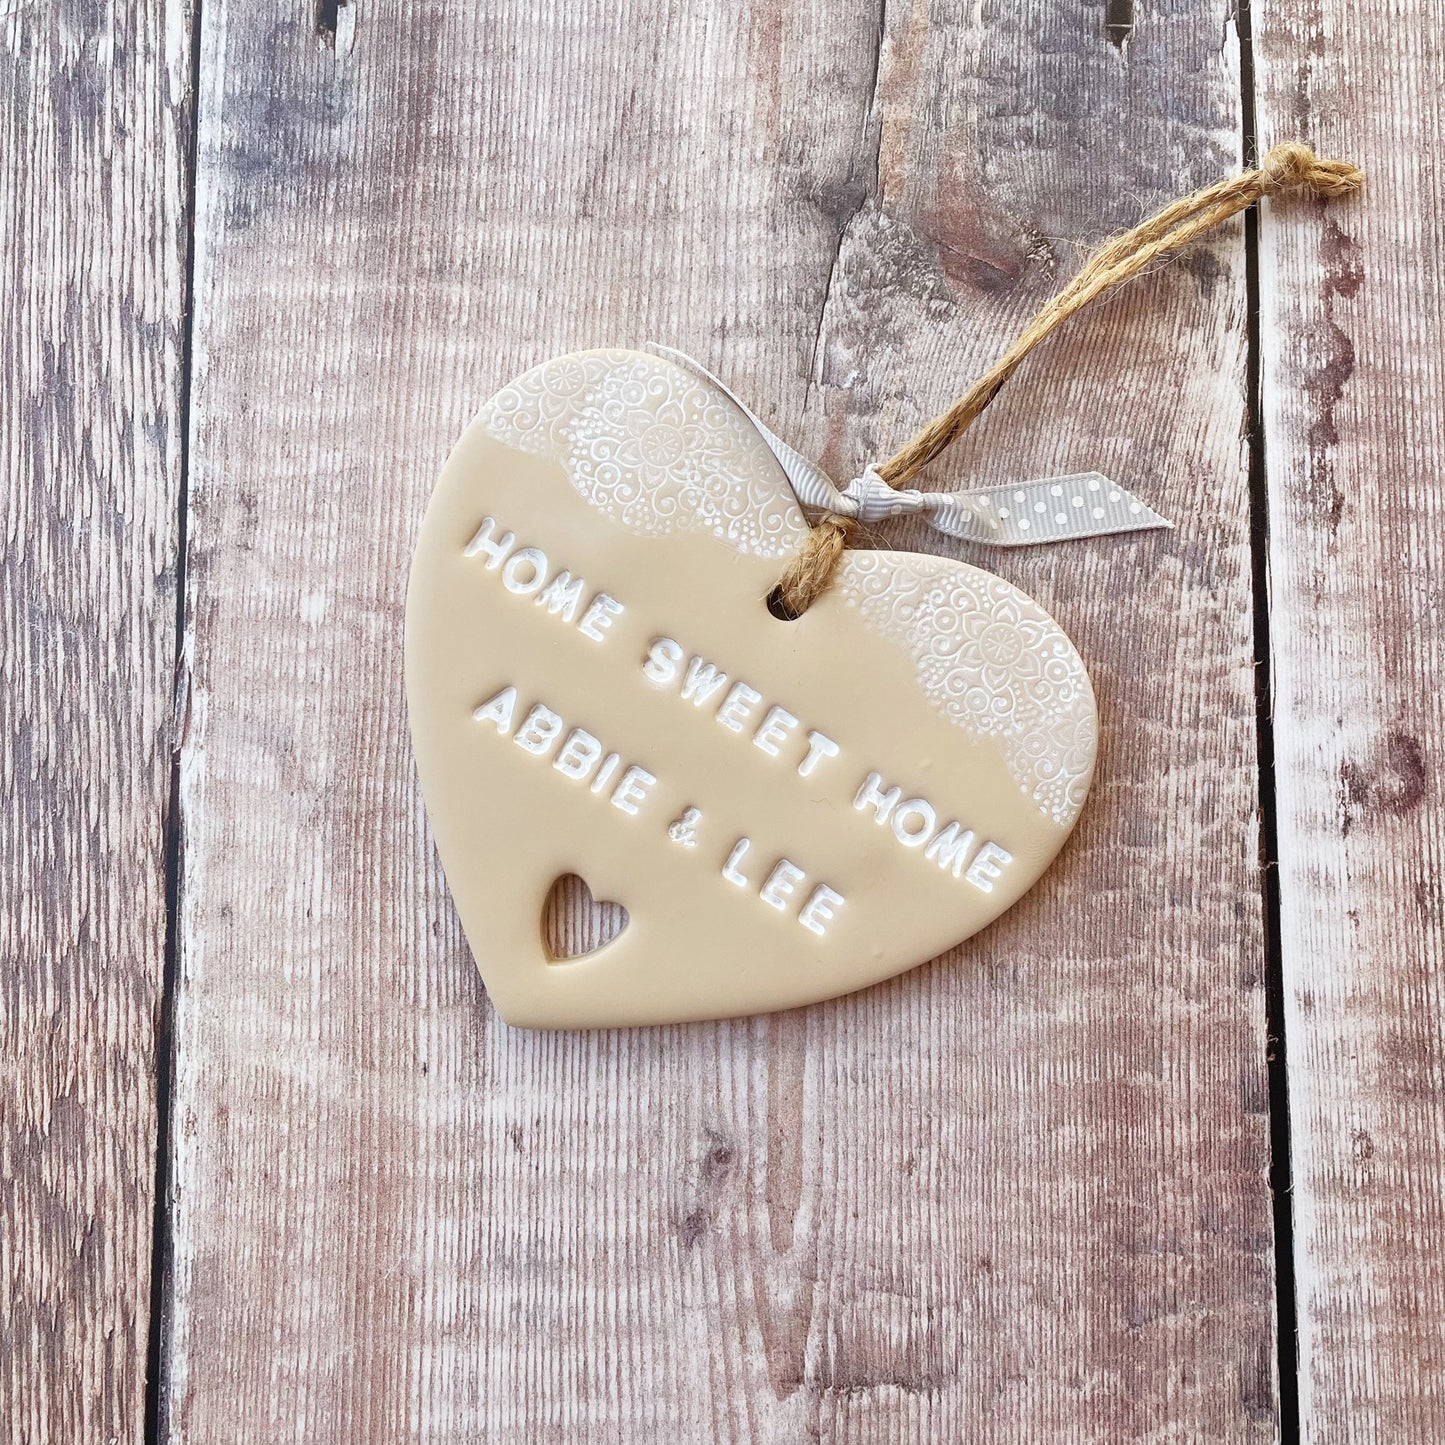 Personalised housewarming new home gift, beige clay heart with a white lace edge at the top of the heart and a heart cut out at the bottom with jute twine for hanging, the heart is personalised with HOME SWEET HOME ABBIE & LEE